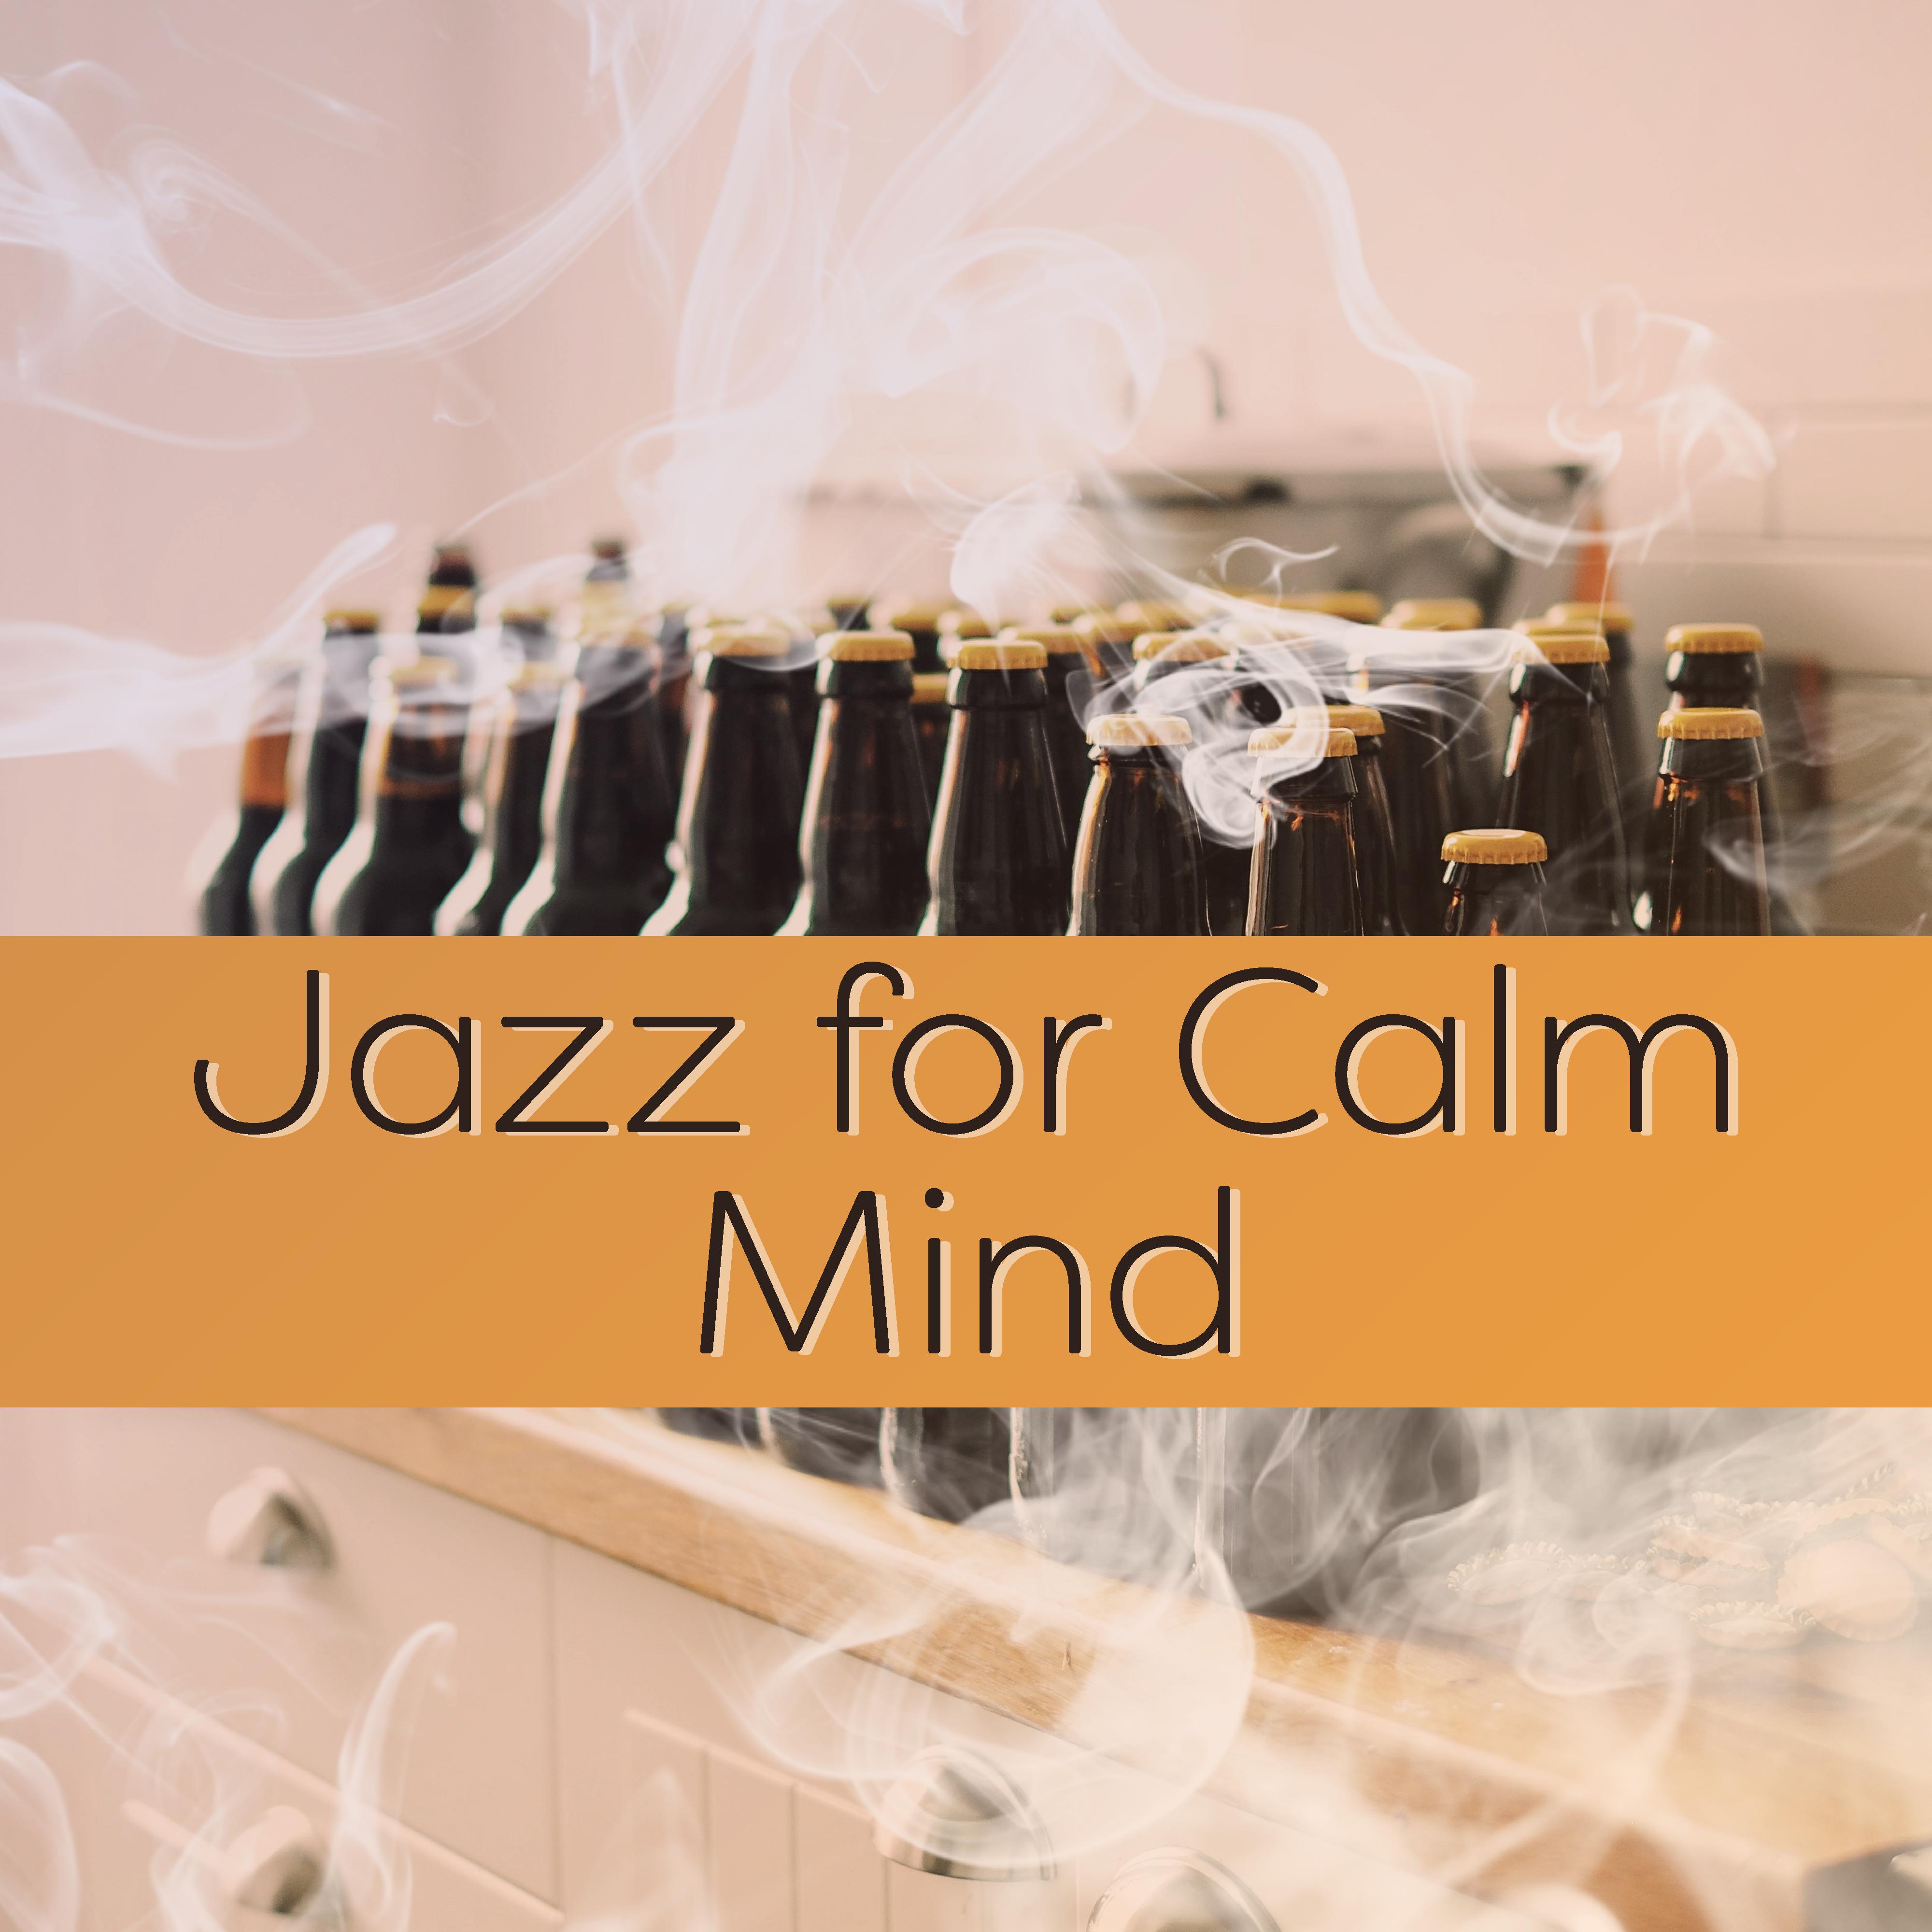 Jazz for Calm Mind – Smooth Sounds of Jazz, Easy Listening, Stress Free, Mind Peace, Chilled Piano